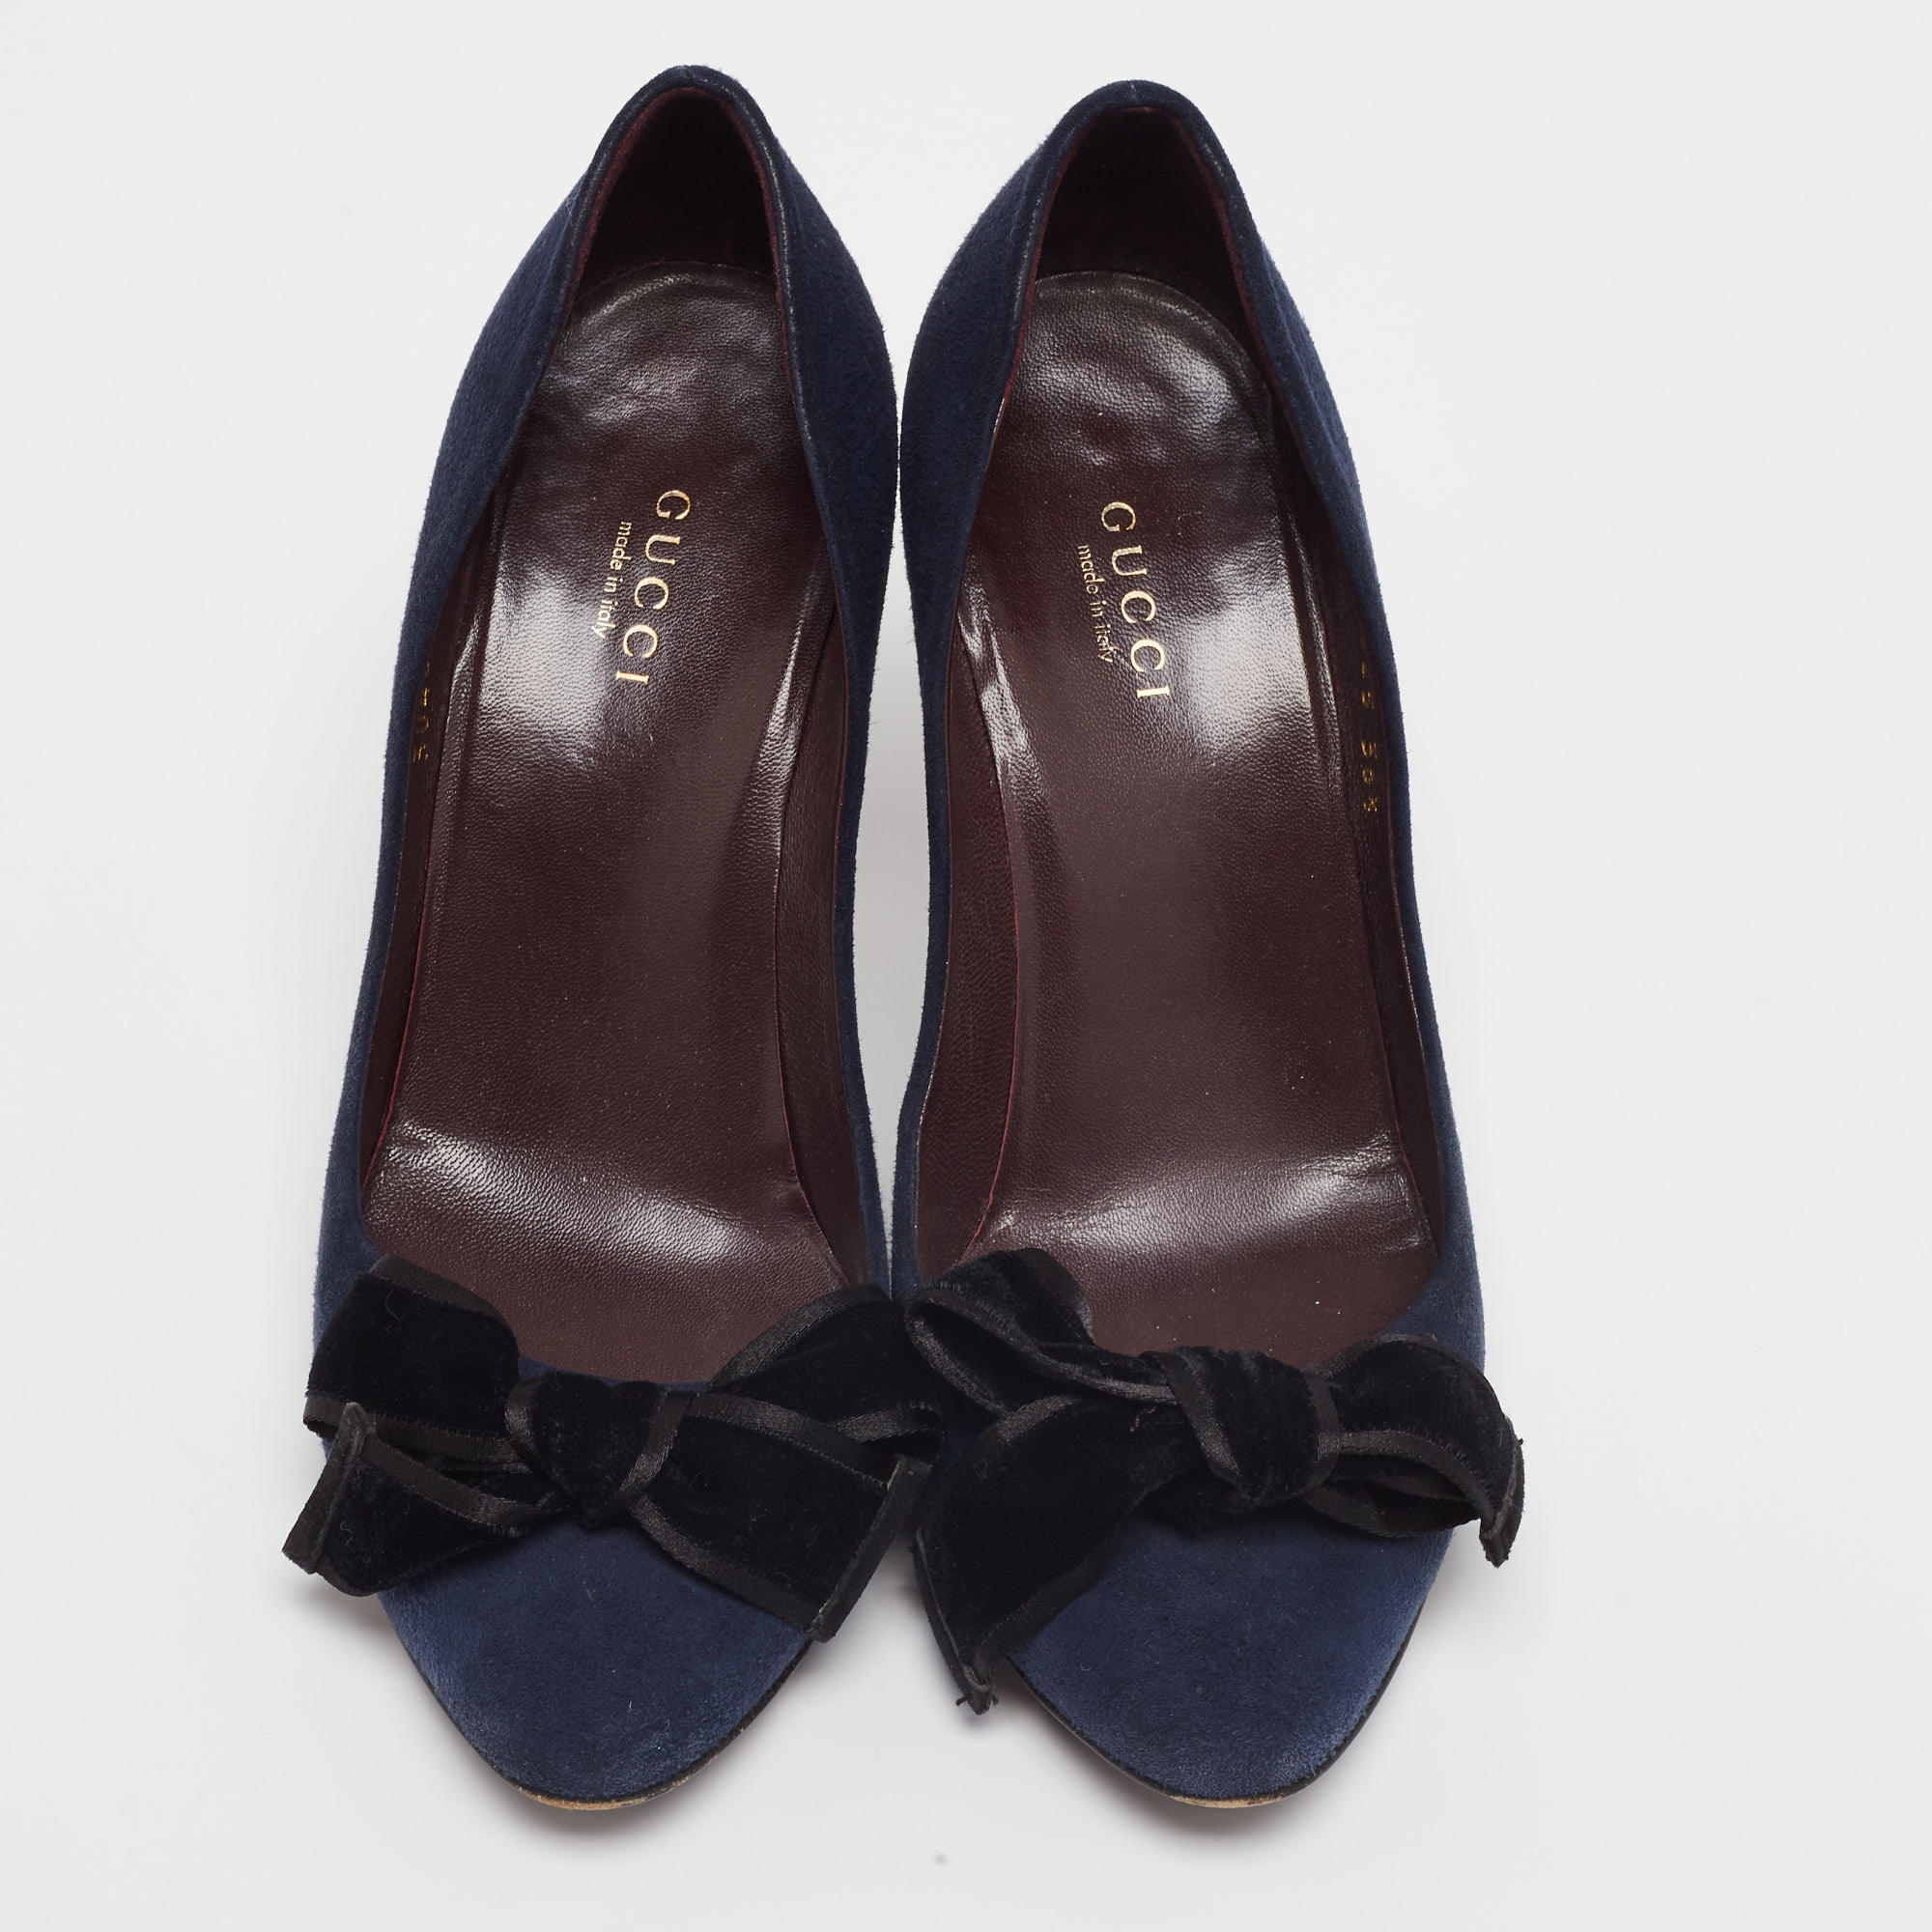 Gucci Navy Blue Suede Bow Round Toe Pumps Size 36.5